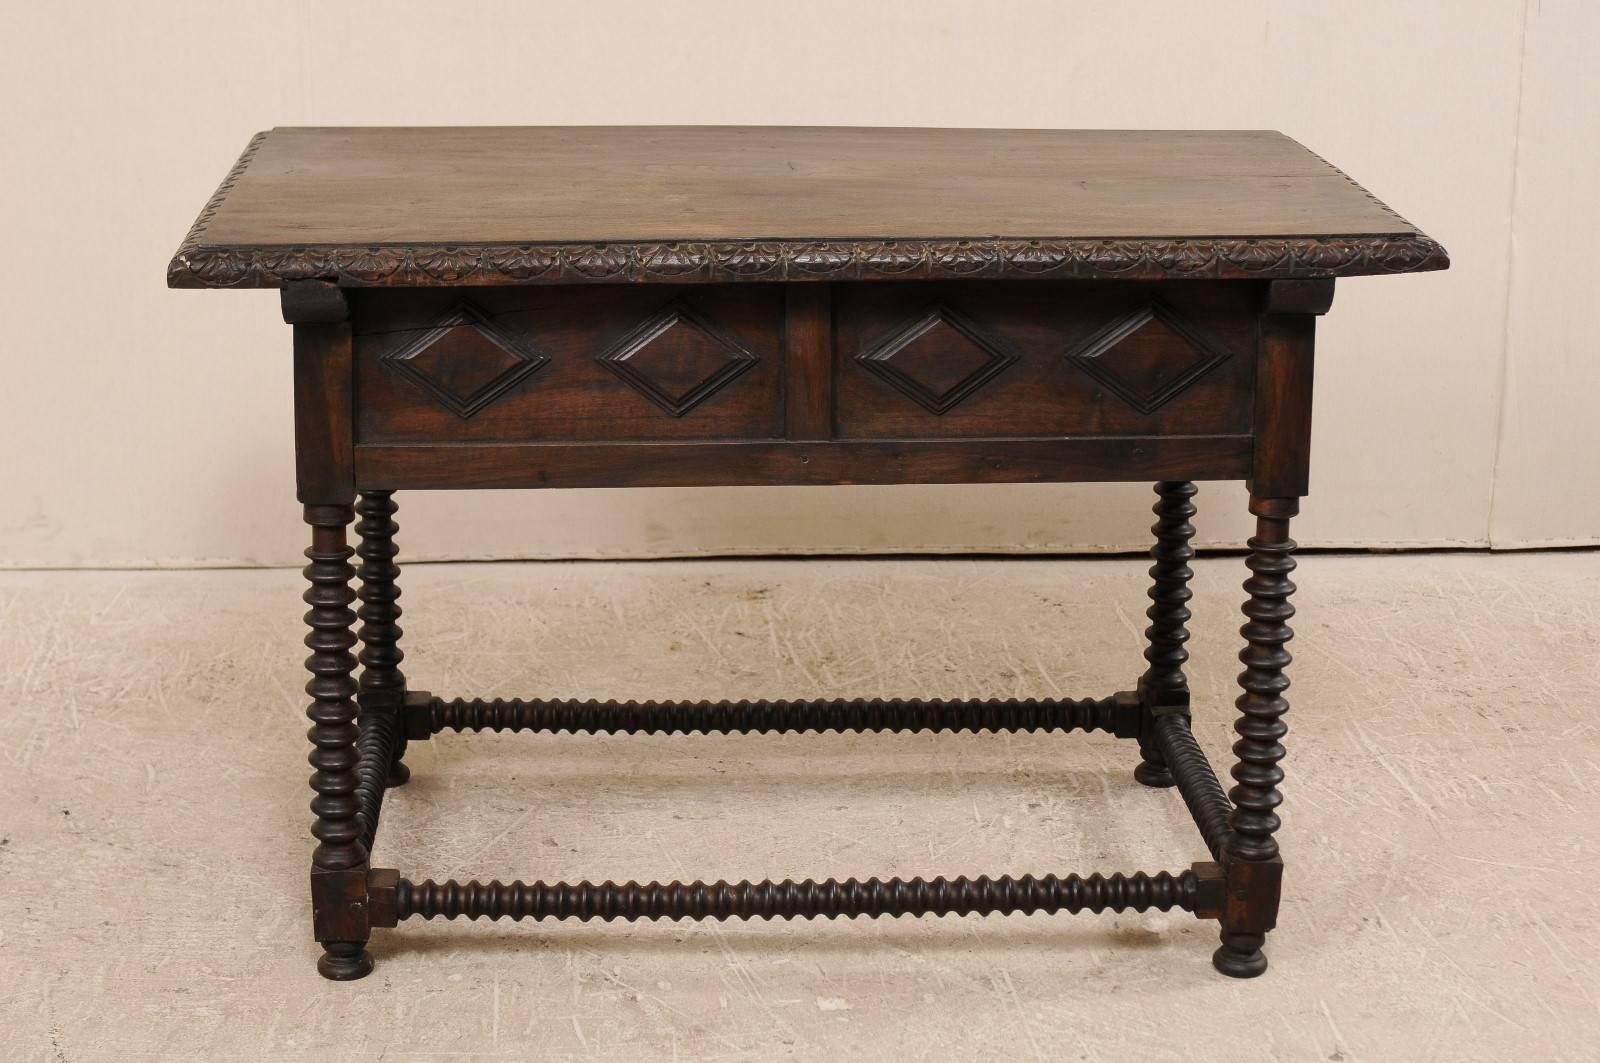 Spanish Early 18th Century Walnut Wood Desk with Spindled Legs and Box Stretcher 1